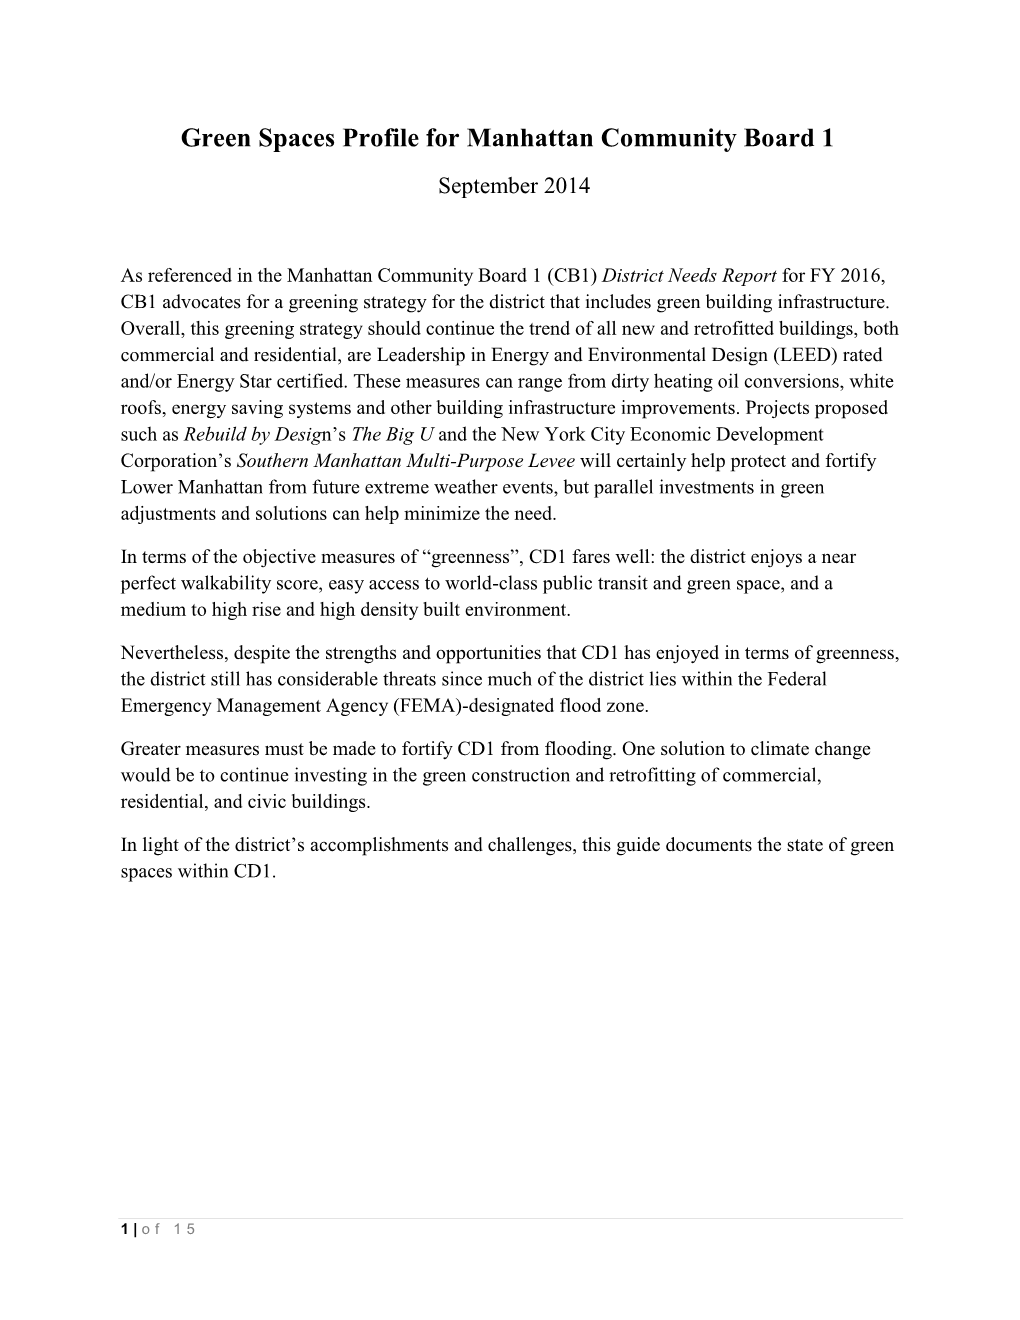 Green Spaces Profile for Manhattan Community Board 1 September 2014